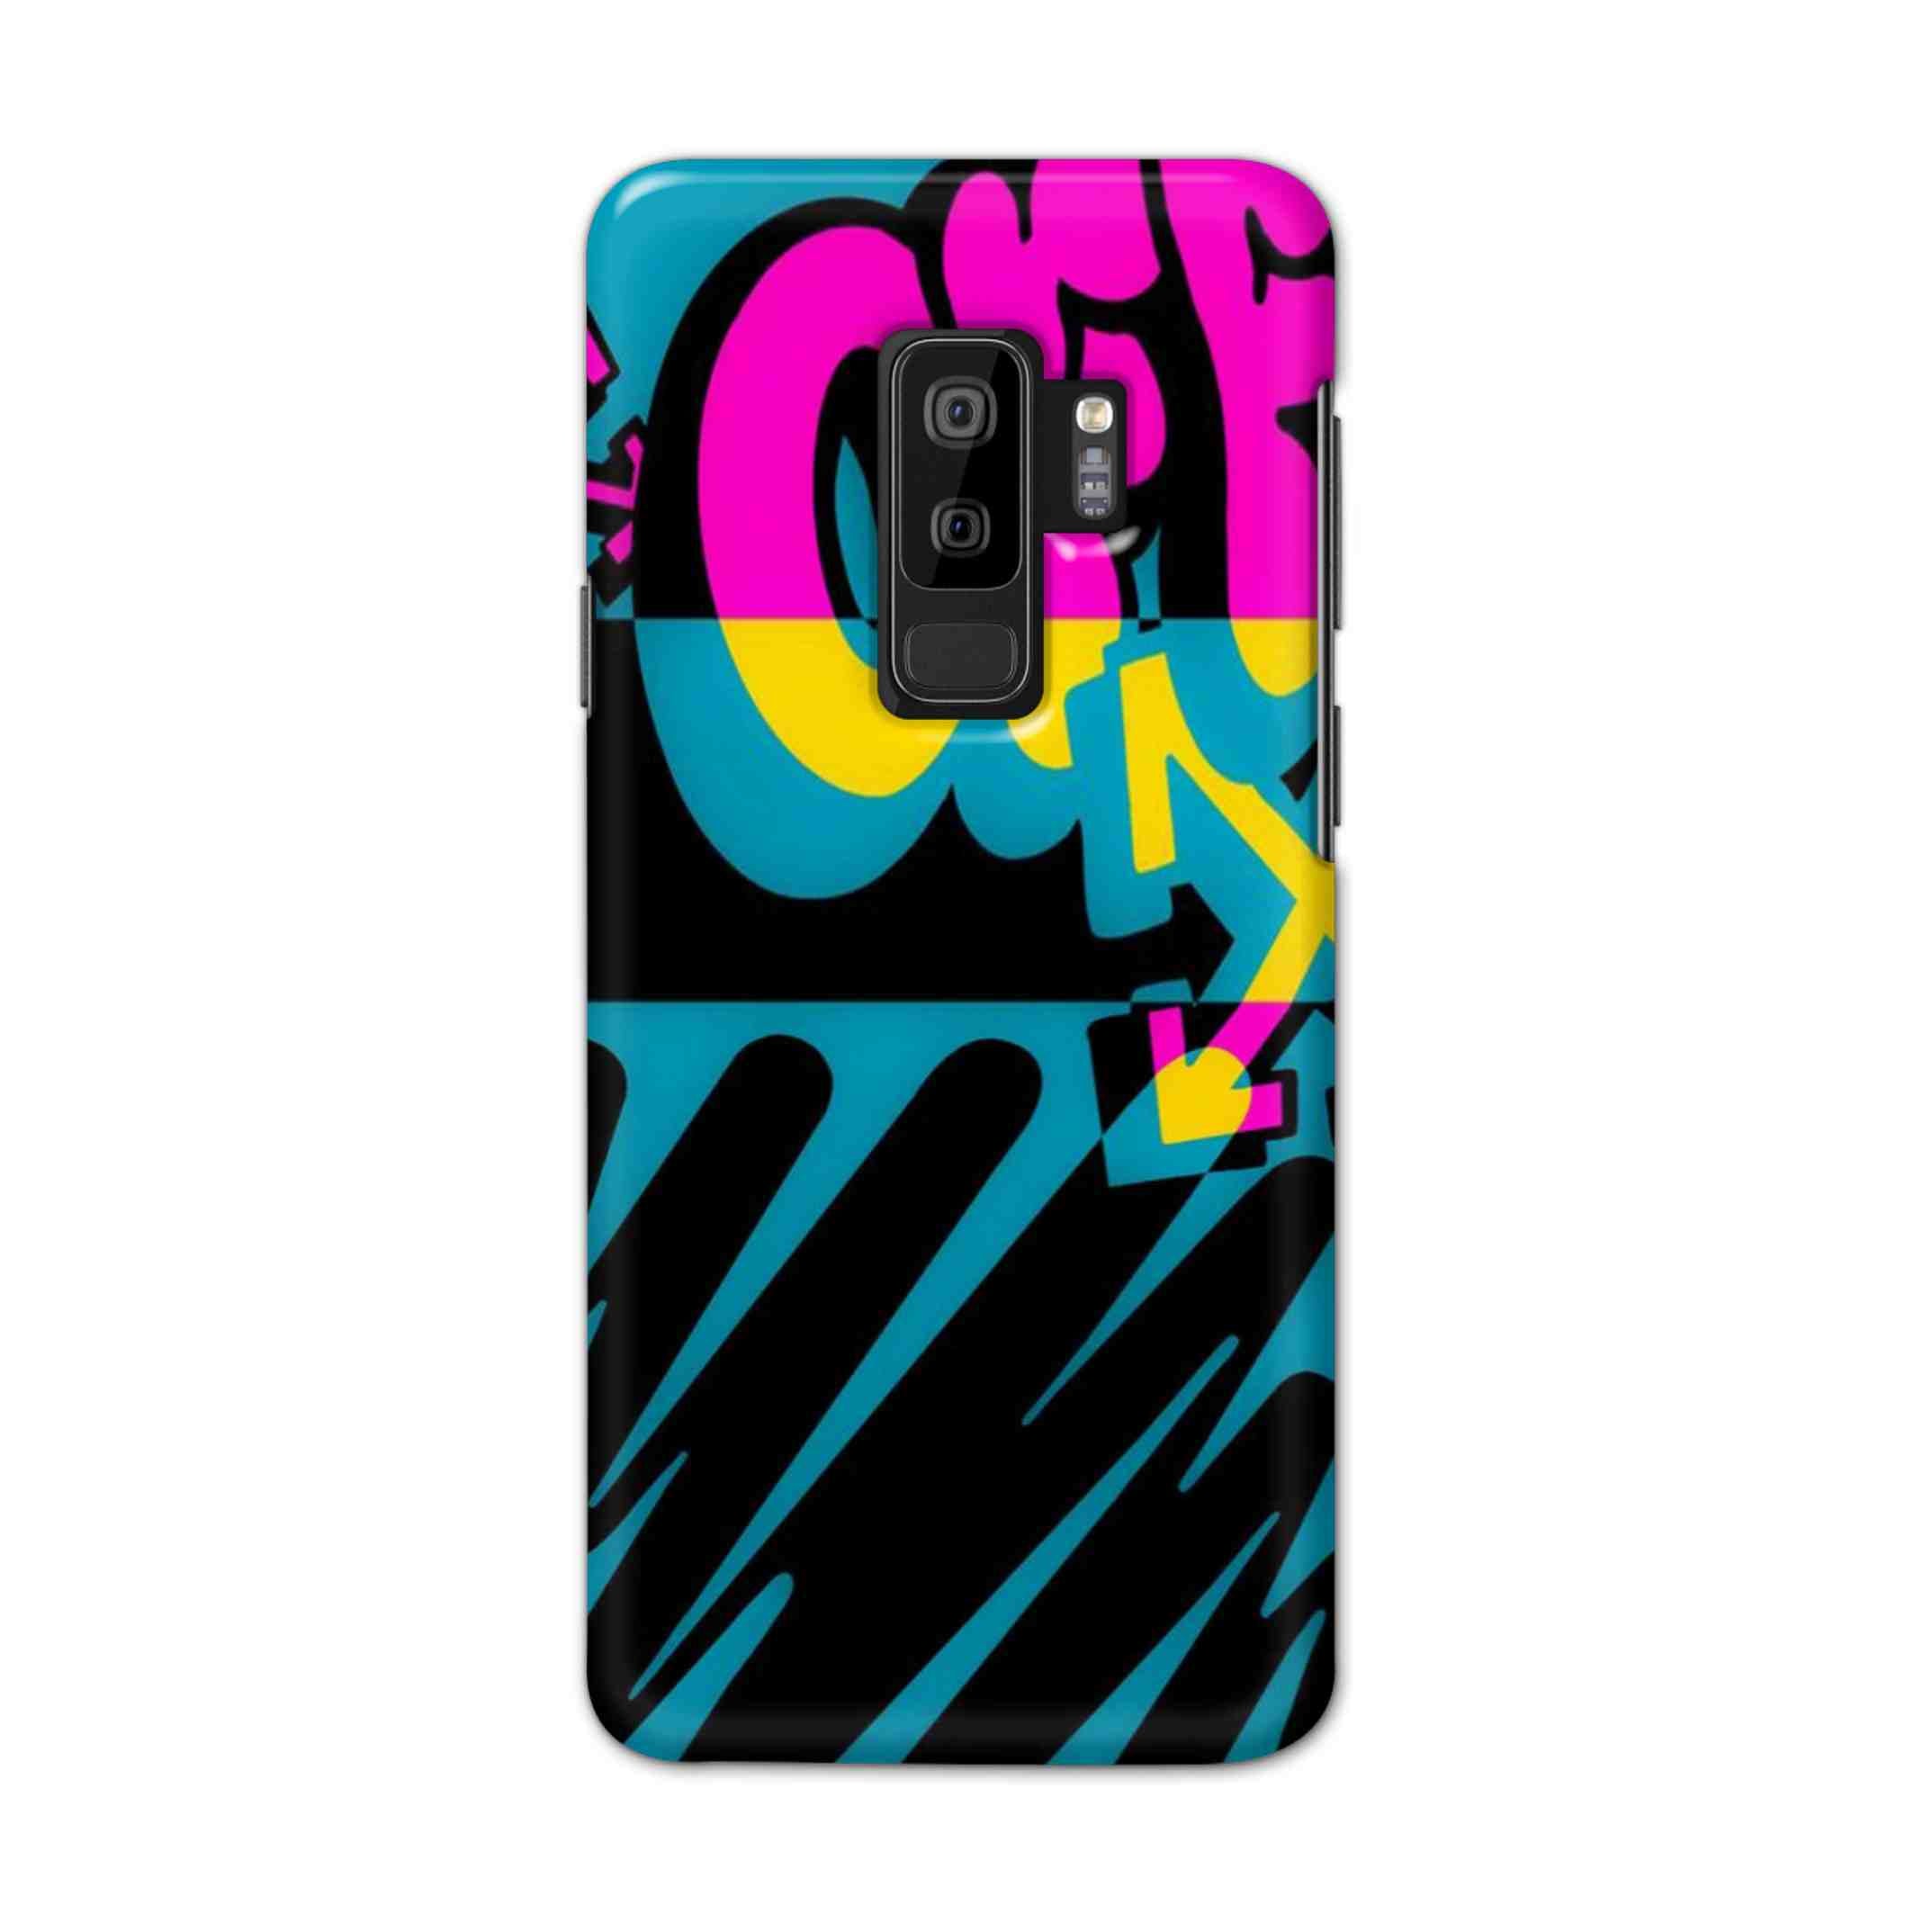 Buy Off Hard Back Mobile Phone Case Cover For Samsung S9 plus Online